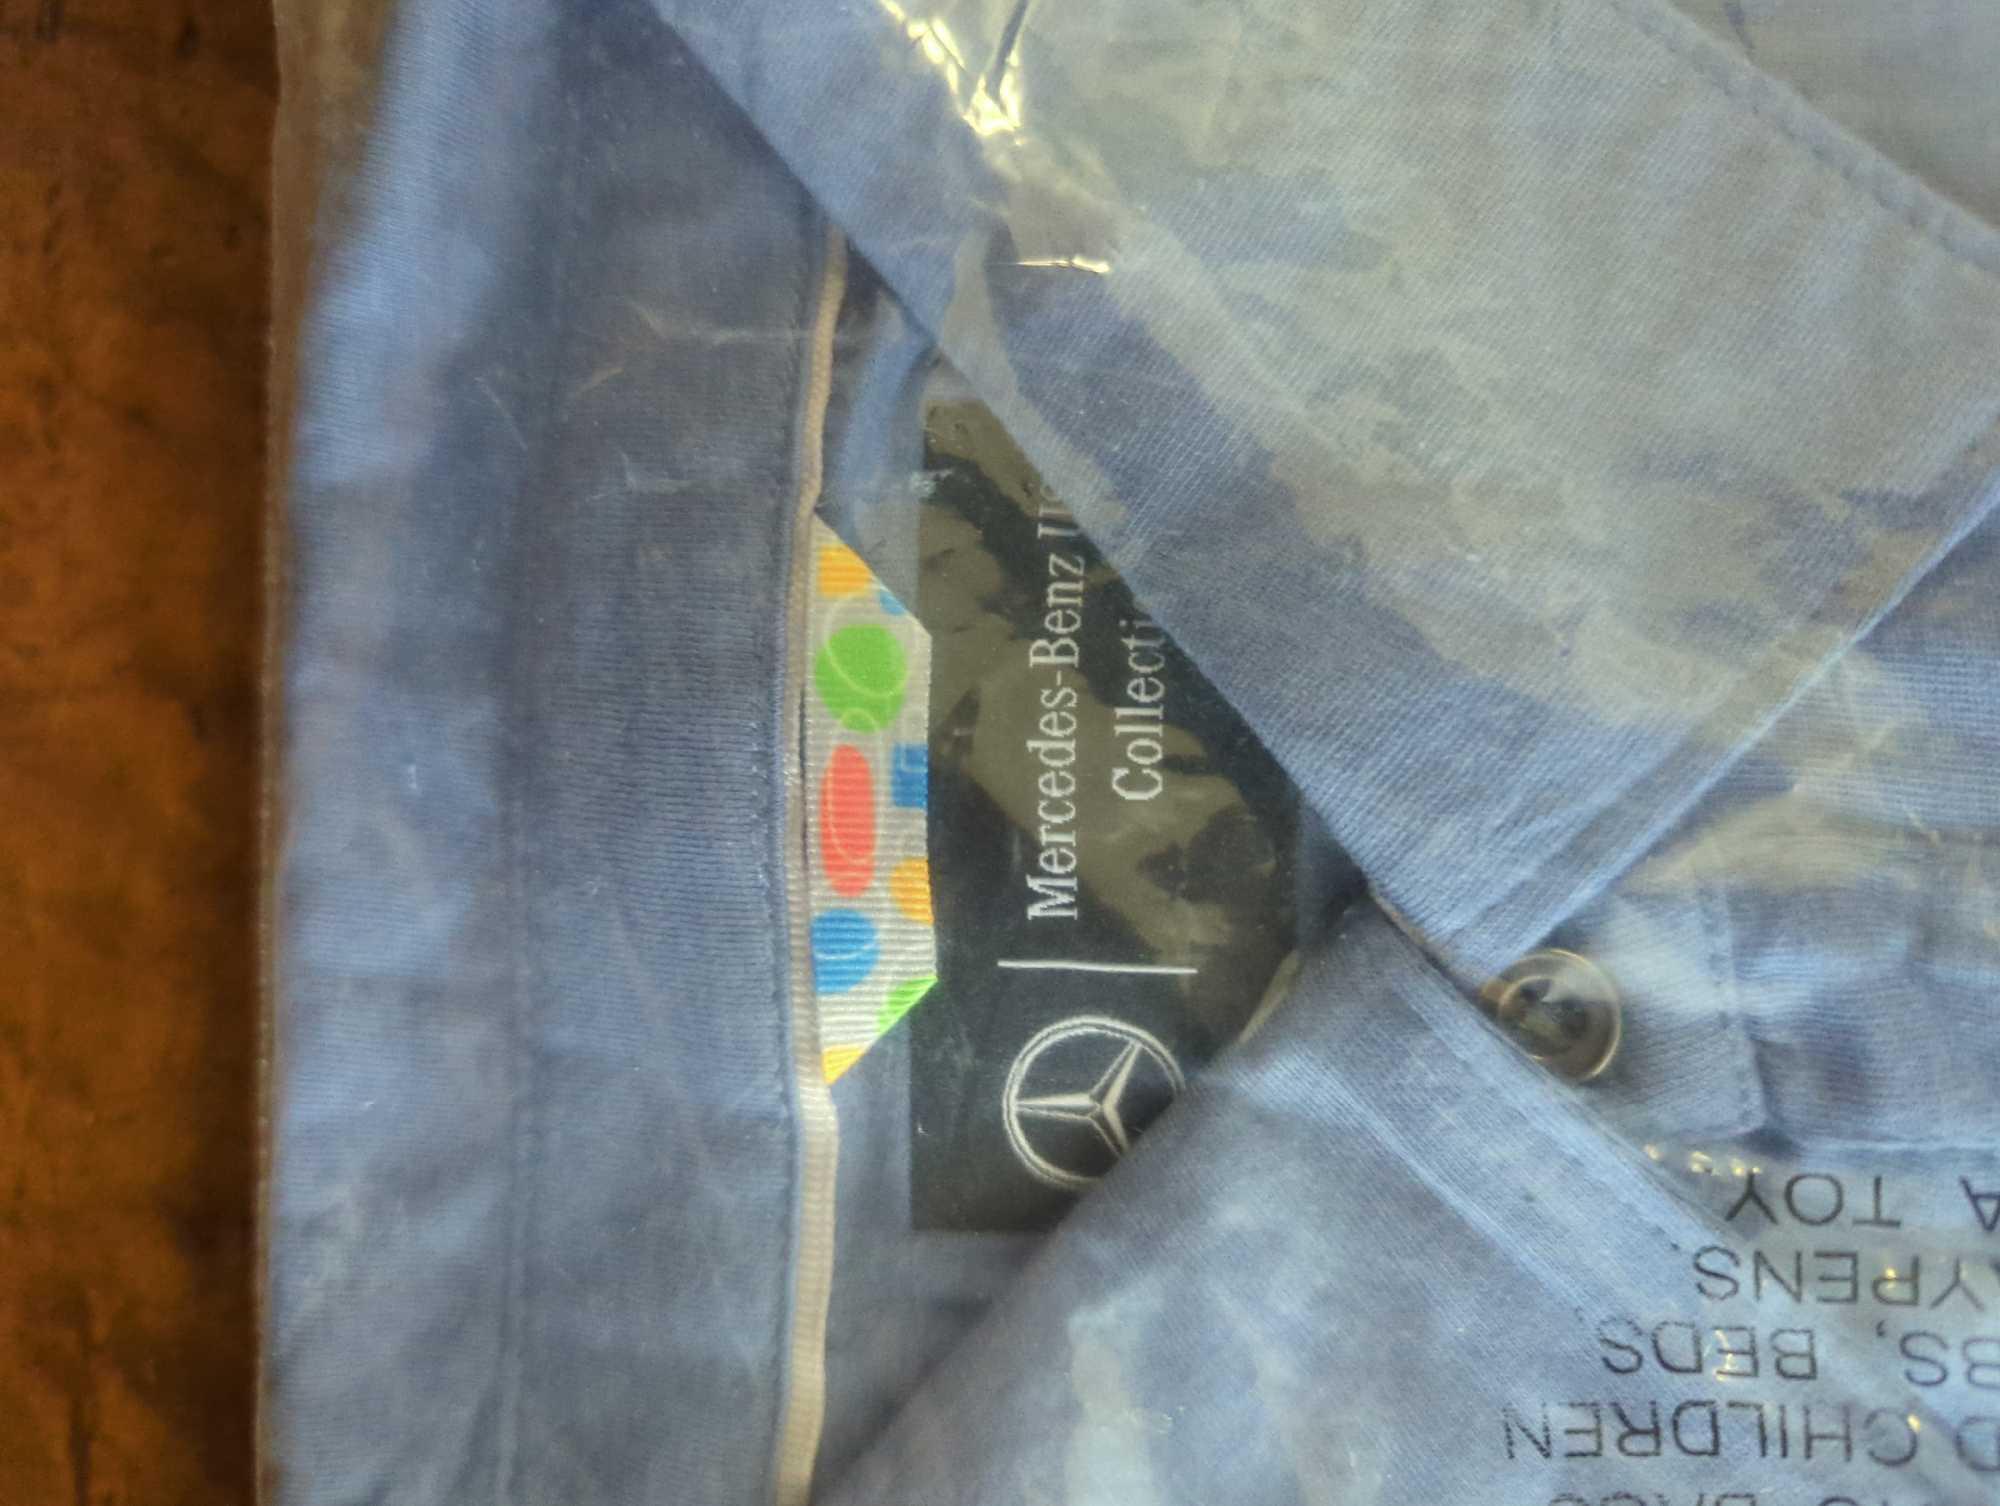 Mercedes Benz USA Collection Mens Shirt Size 2XL in Blue, New In Package.